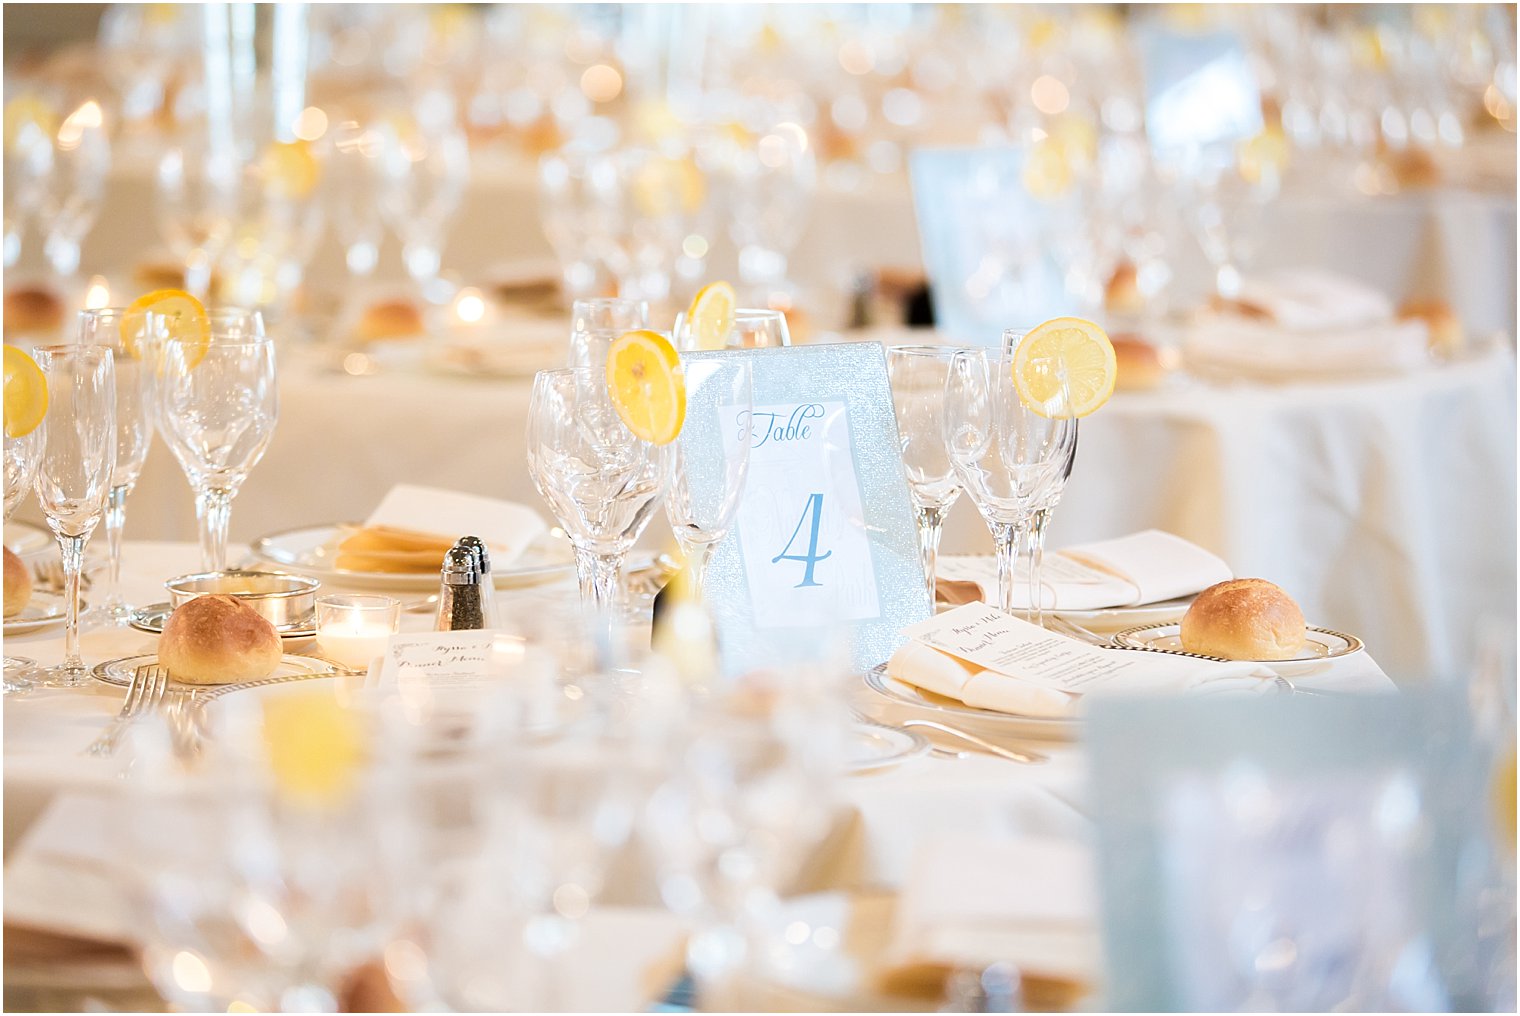 Table number idea for classic wedding | Photo by Idalia Photography